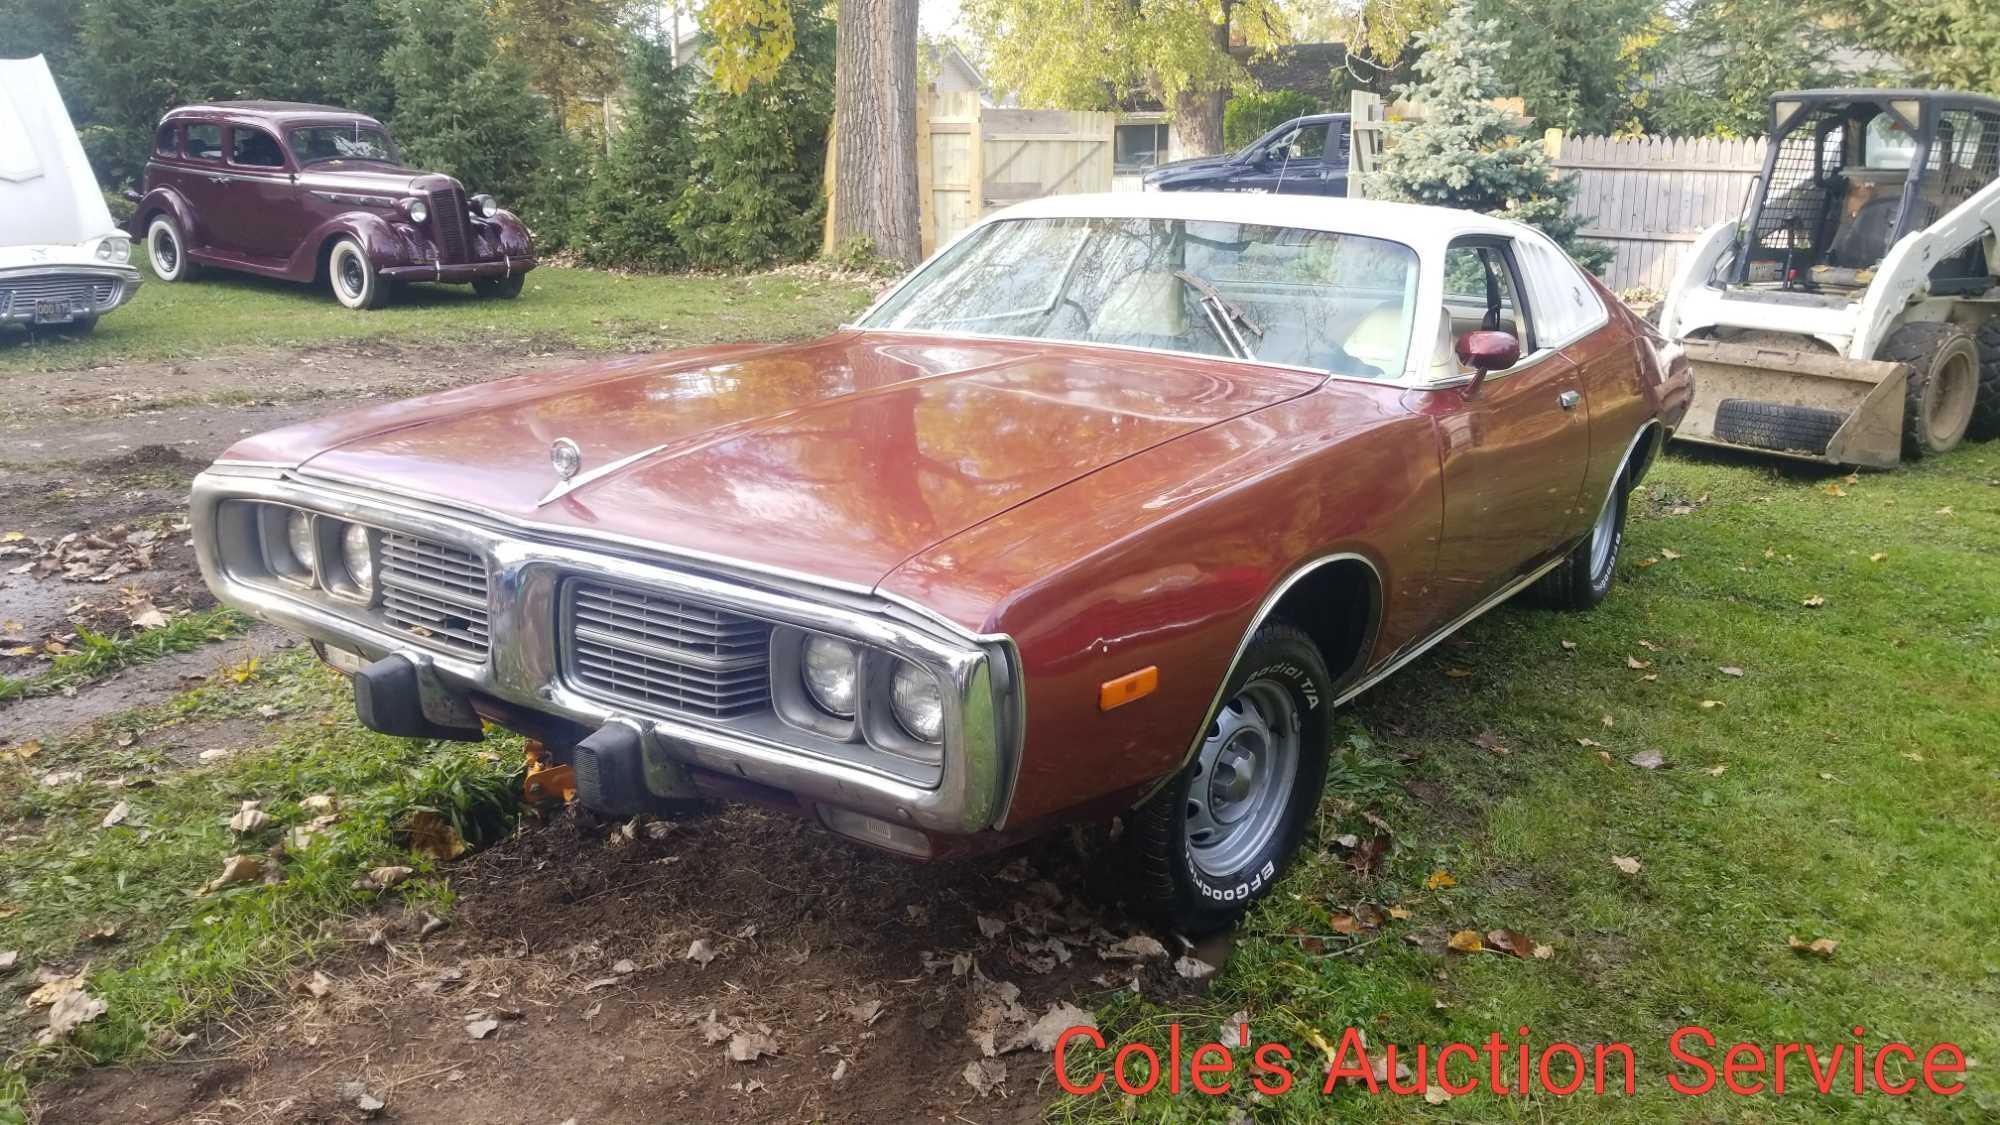 1974 Dodge charger SE edition featuring air conditioning, bucket seats and slap stick shifter. 360